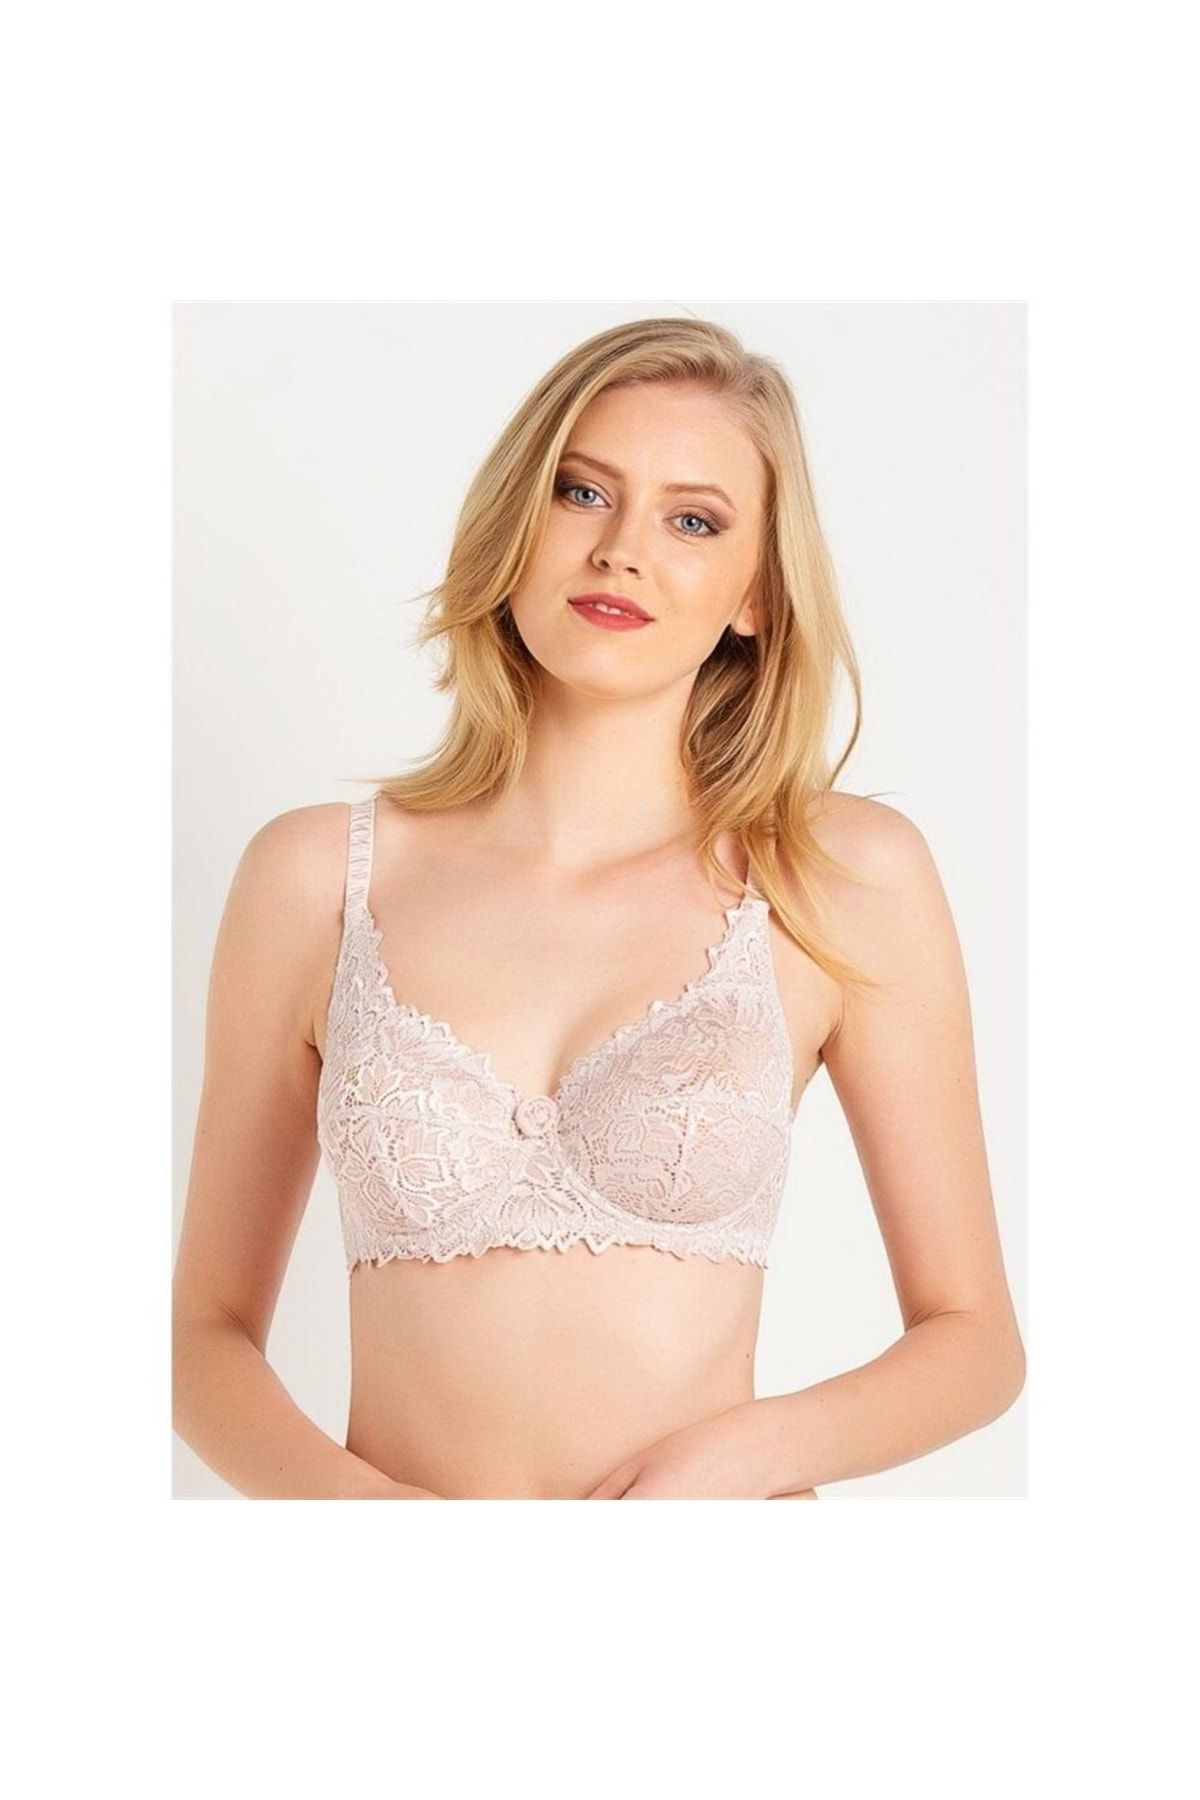 Pierre Cardin Underwire Extra Support Double Push-Up Bra 6329 (B